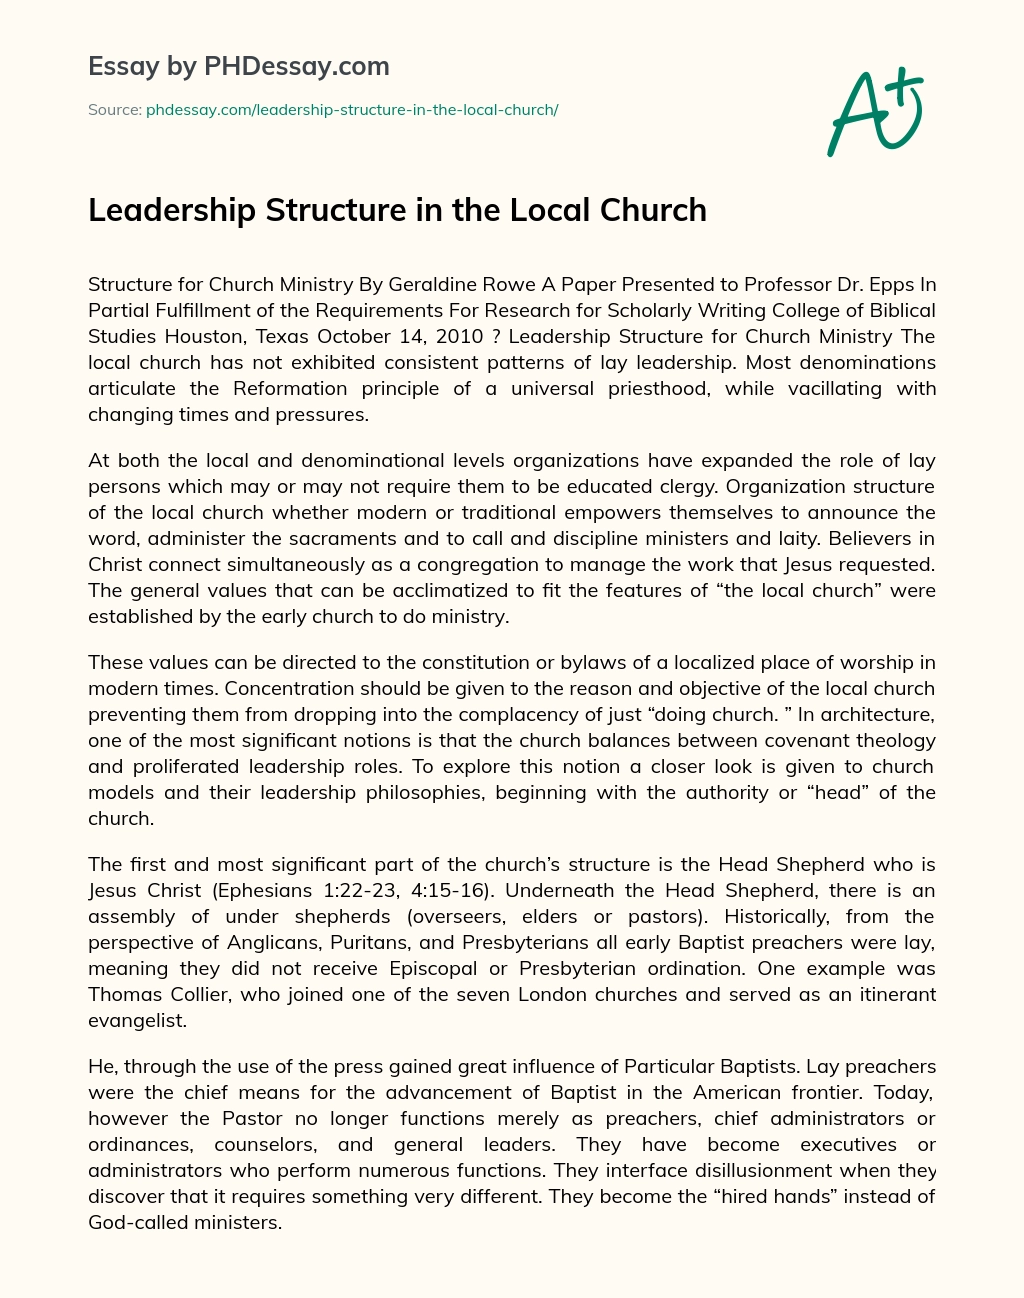 Leadership Structure in the Local Church essay